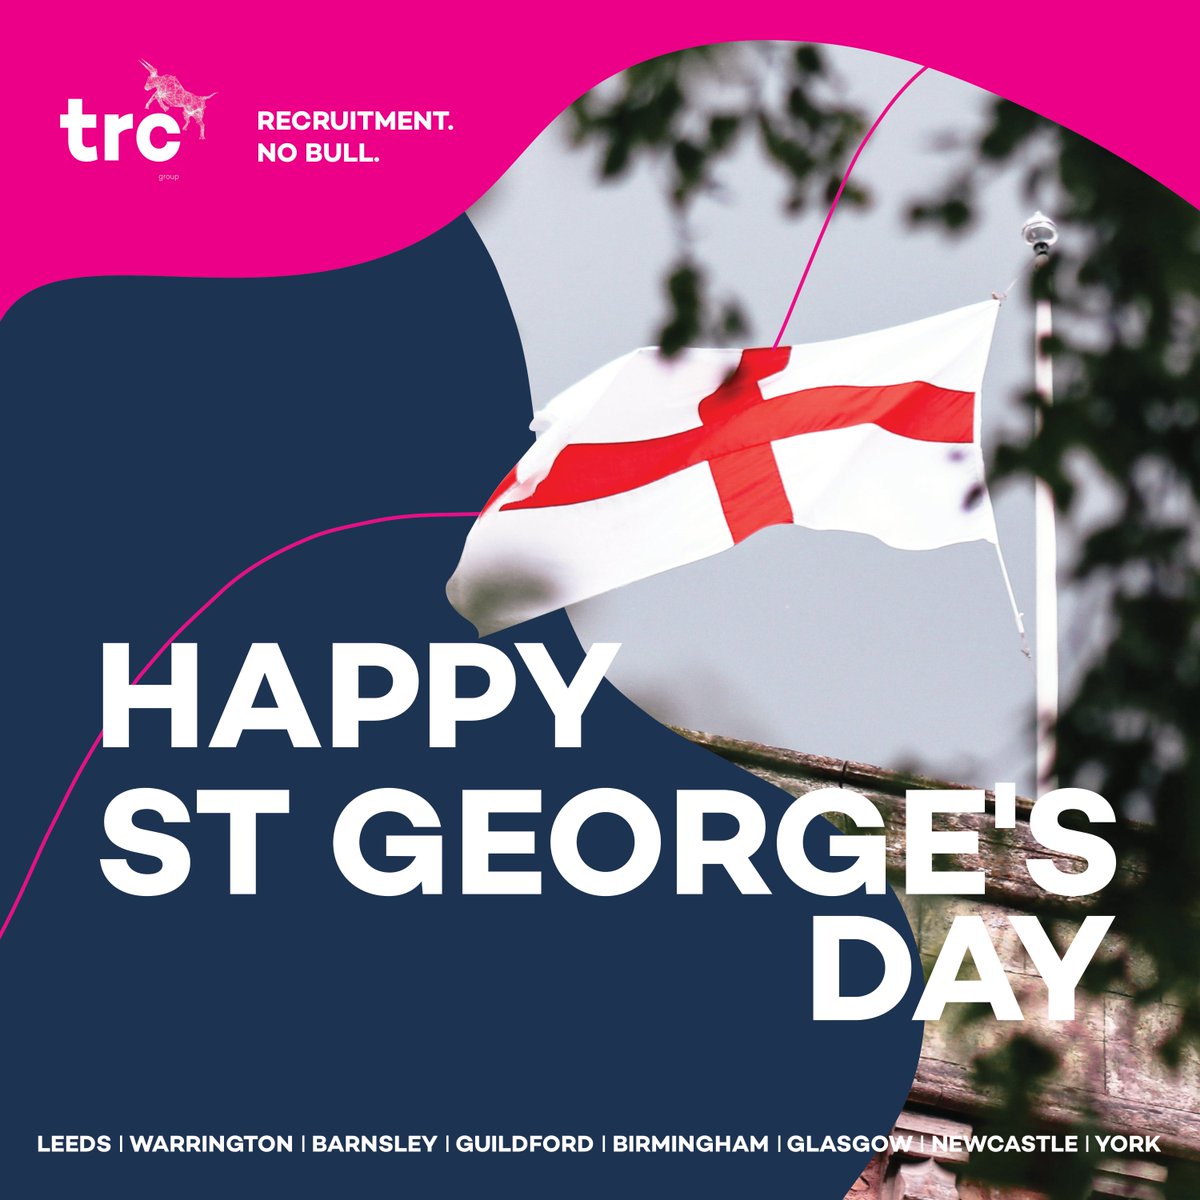 Happy St. George's Day! 🏴󠁧󠁢󠁥󠁮󠁧󠁿 Celebrating bravery, unity, and the spirit of England. Let's keep the flame of courage burning bright today and every day! #StGeorgesDay #ProudToBeEnglish #TRC #NOBULL